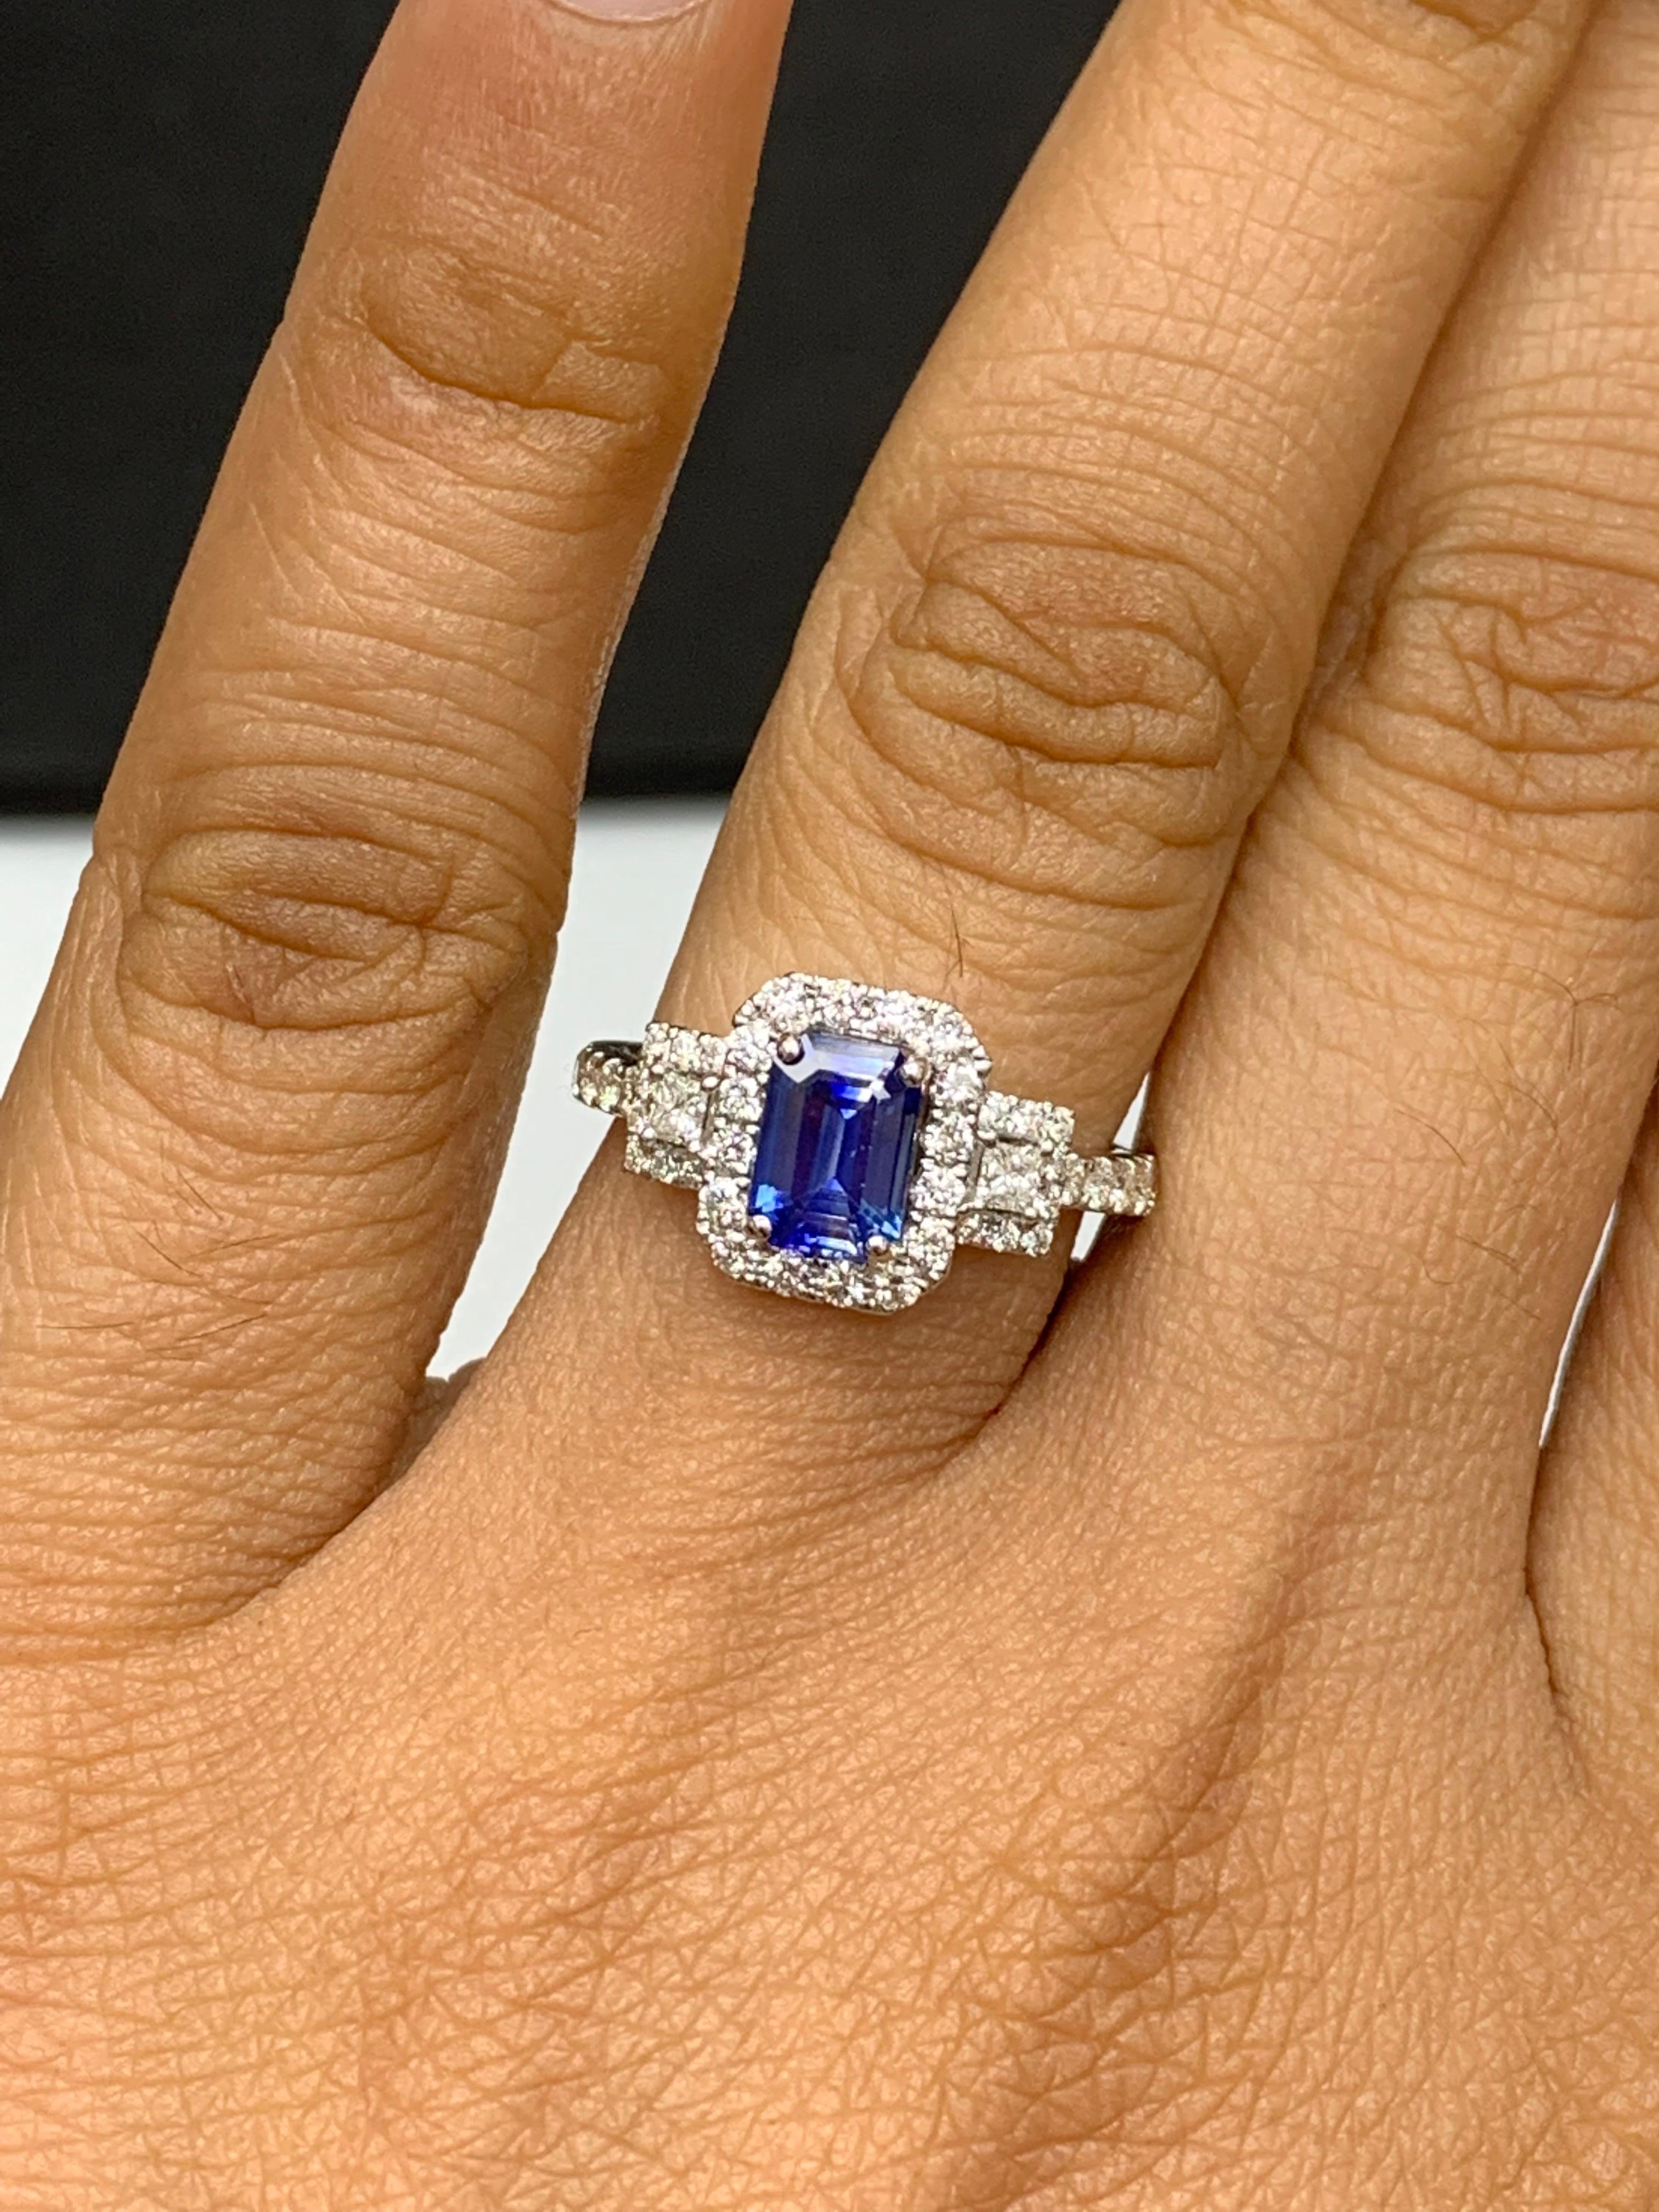 1.21 Carat Emerald Cut Blue Sapphire and Diamond Halo Ring in 18K White Gold For Sale 2